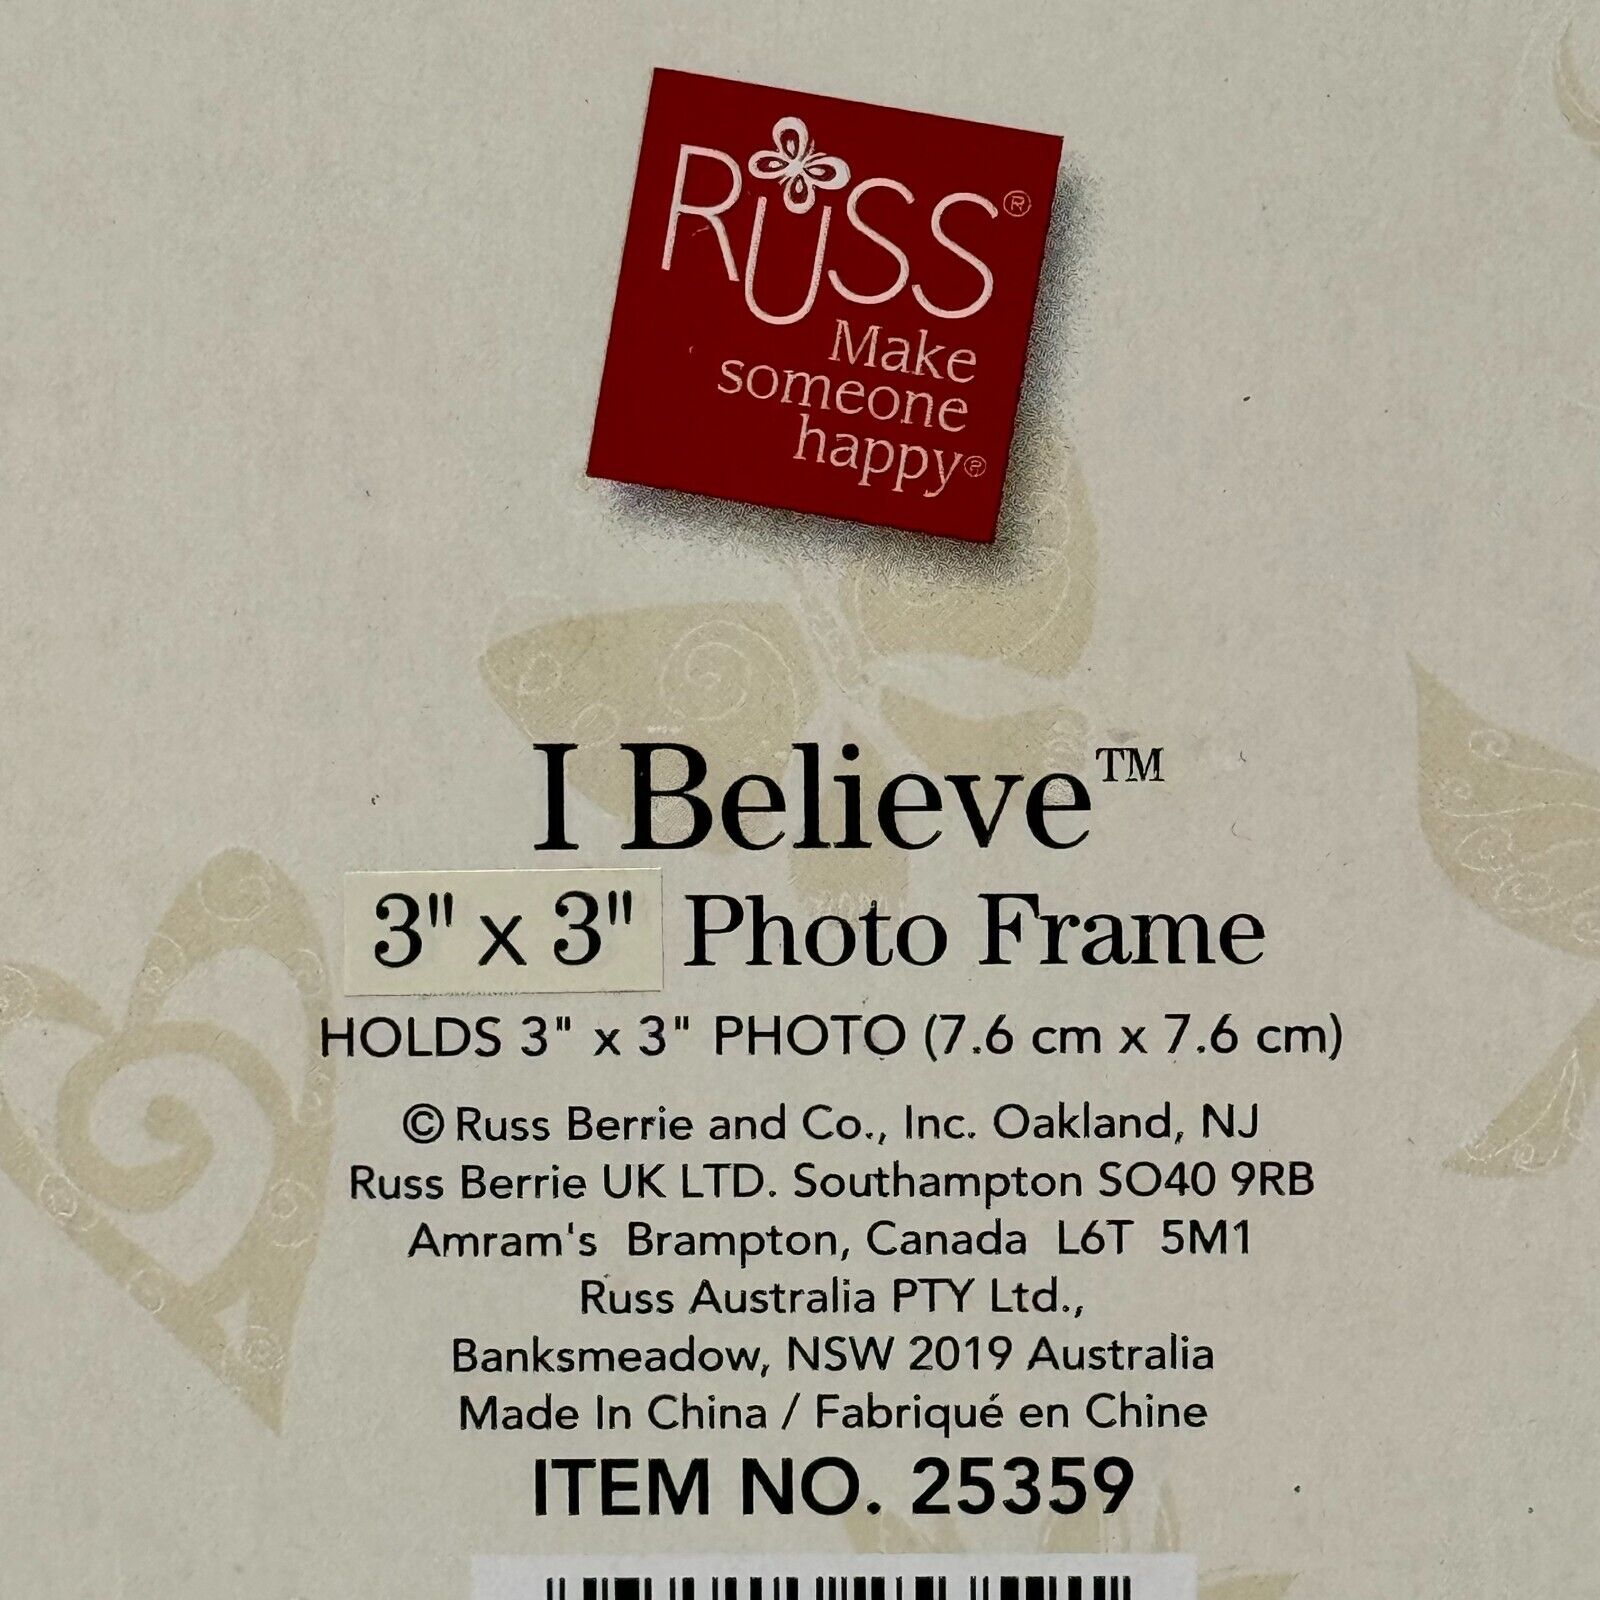 Believe Hope Inspire Dream Sentiments by Russ 3x3in Round Photo Frame New in Box